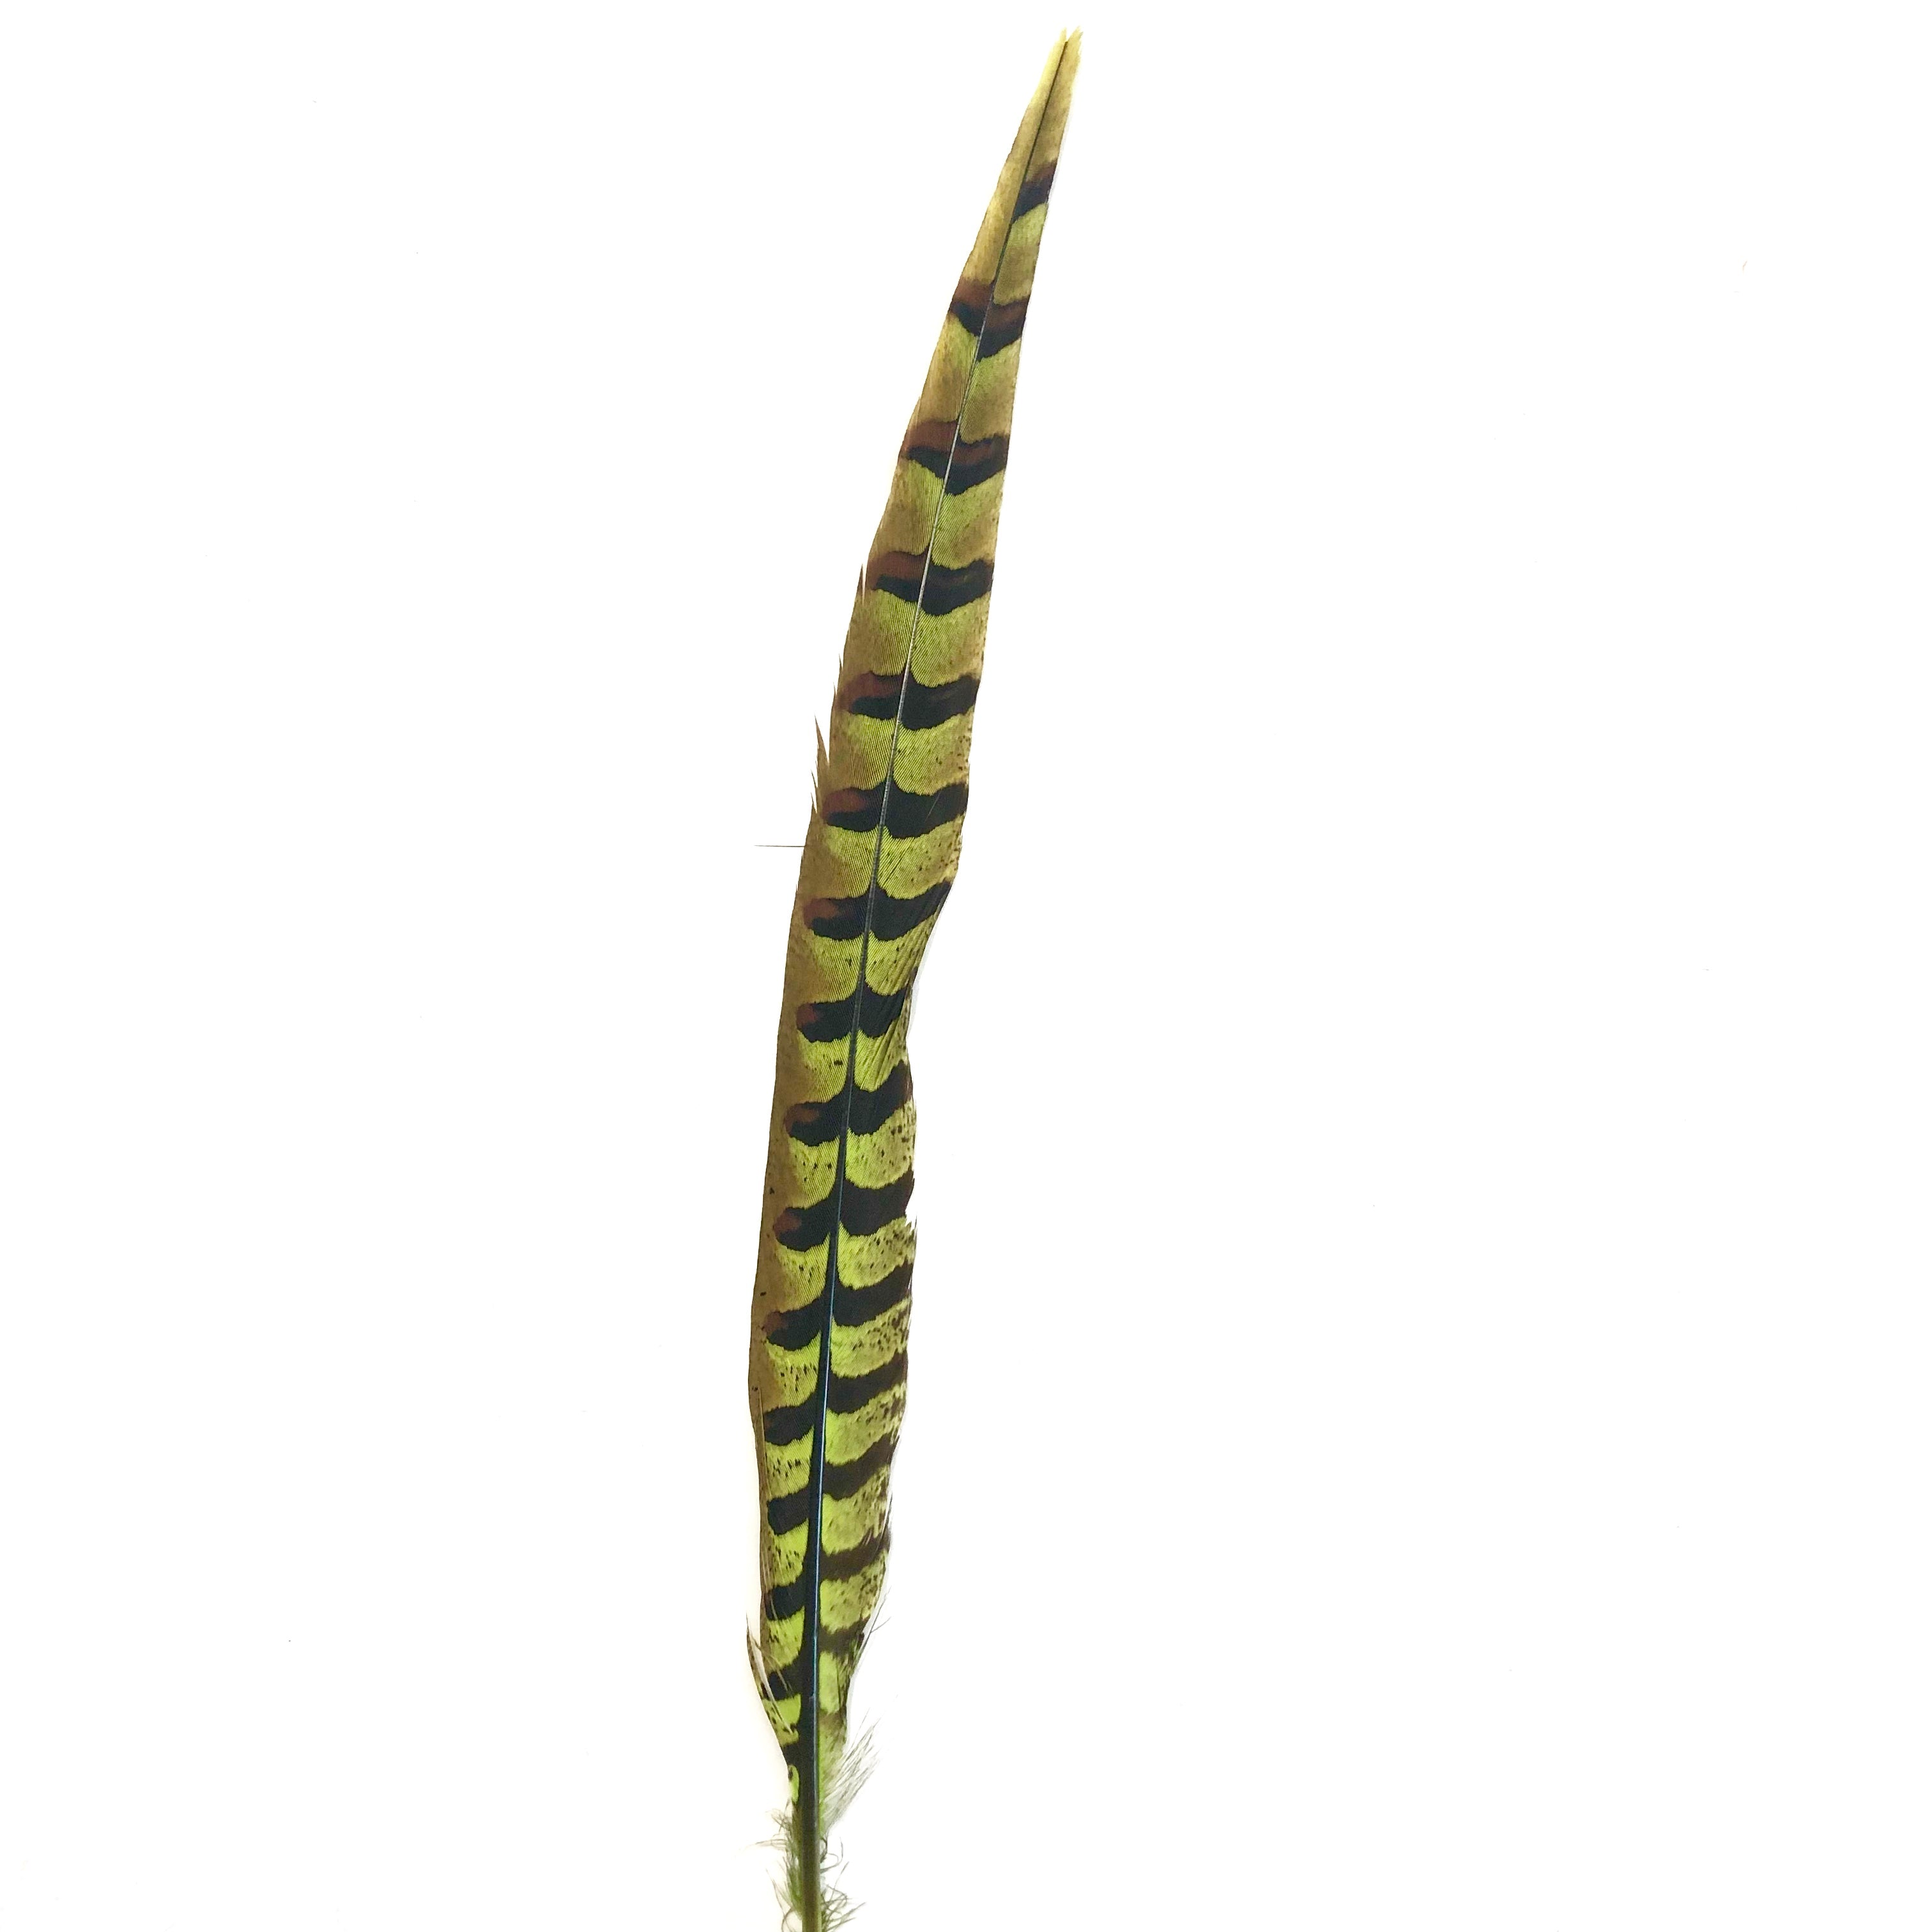 18" to 20" Reeves Pheasant Tail Feather - Lime Green ((SECONDS))